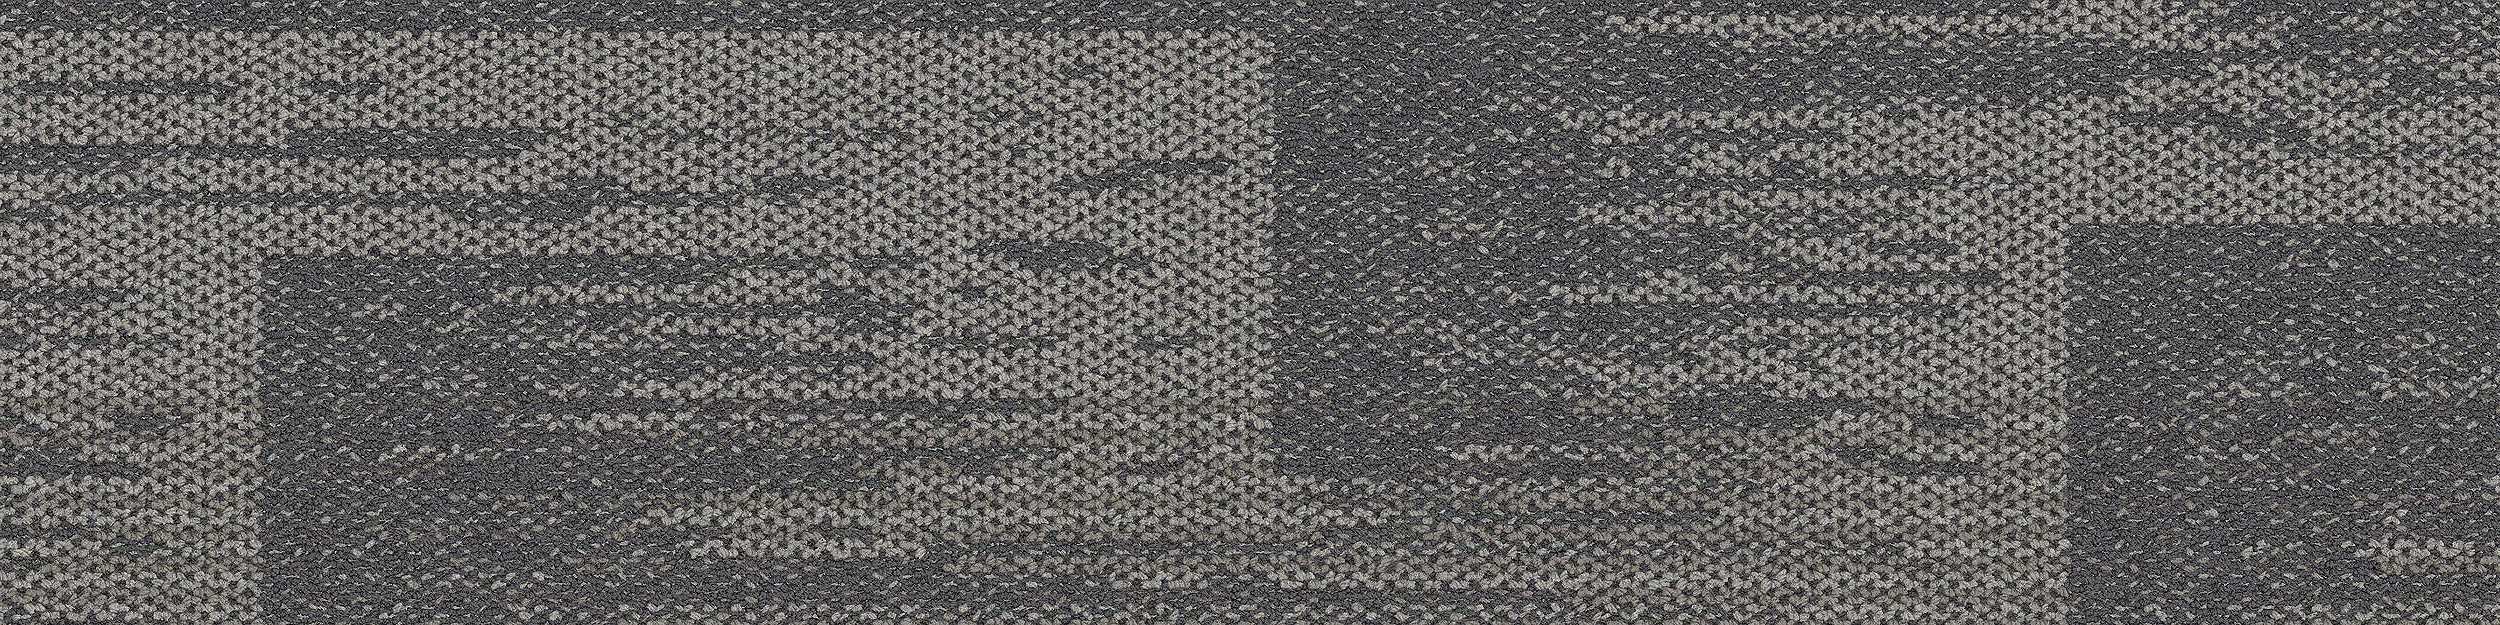 AE311 Carpet Tile In Iron image number 14